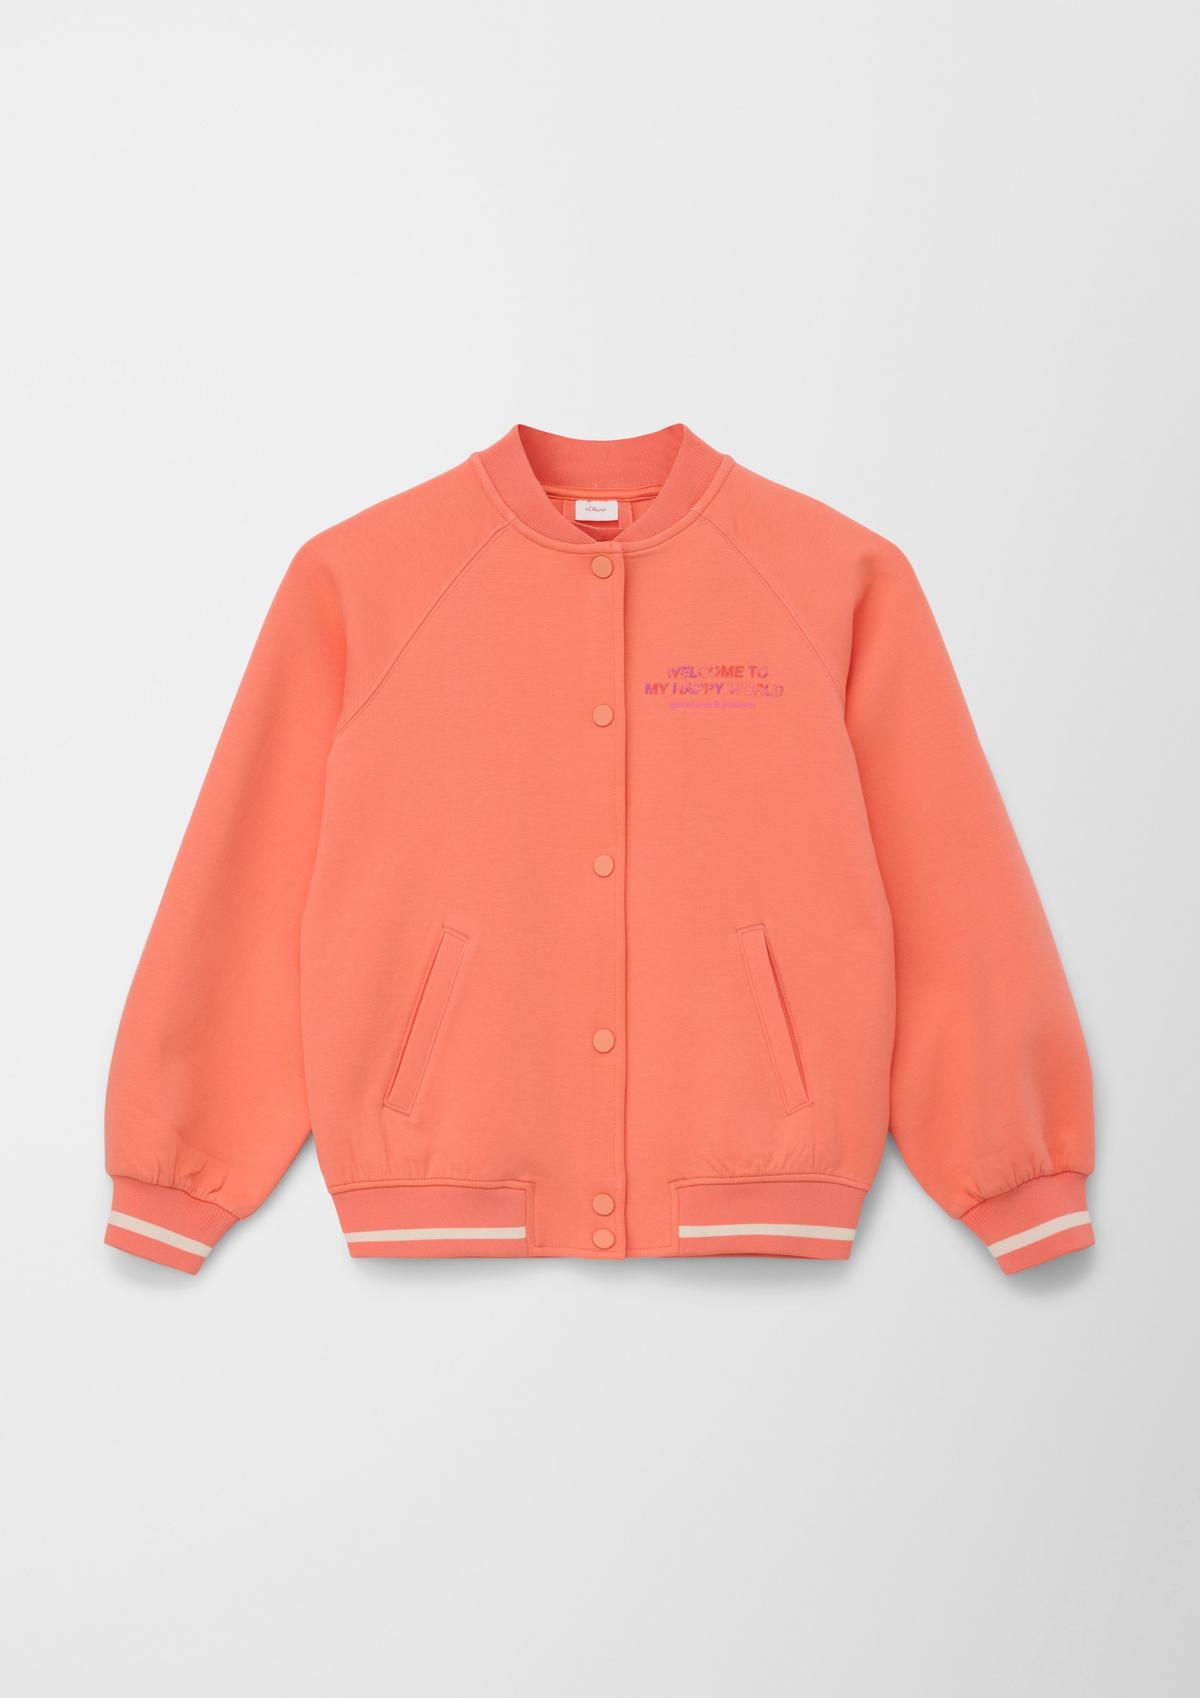 s.Oliver Campus-style jacket